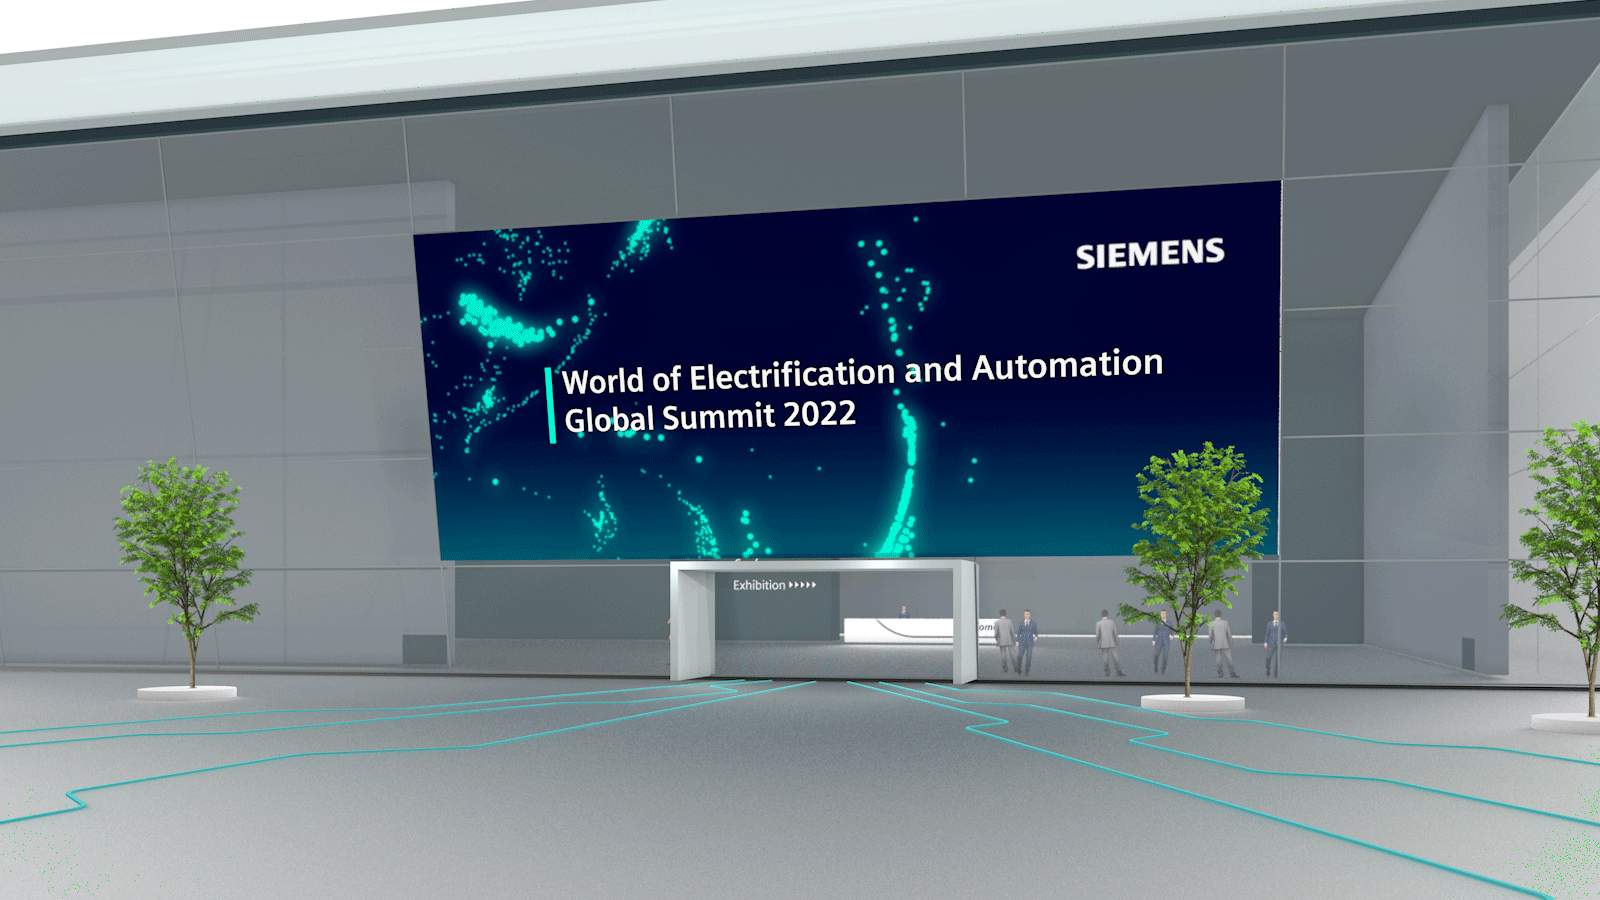 World of Electrification and Automation Global Summit 2022